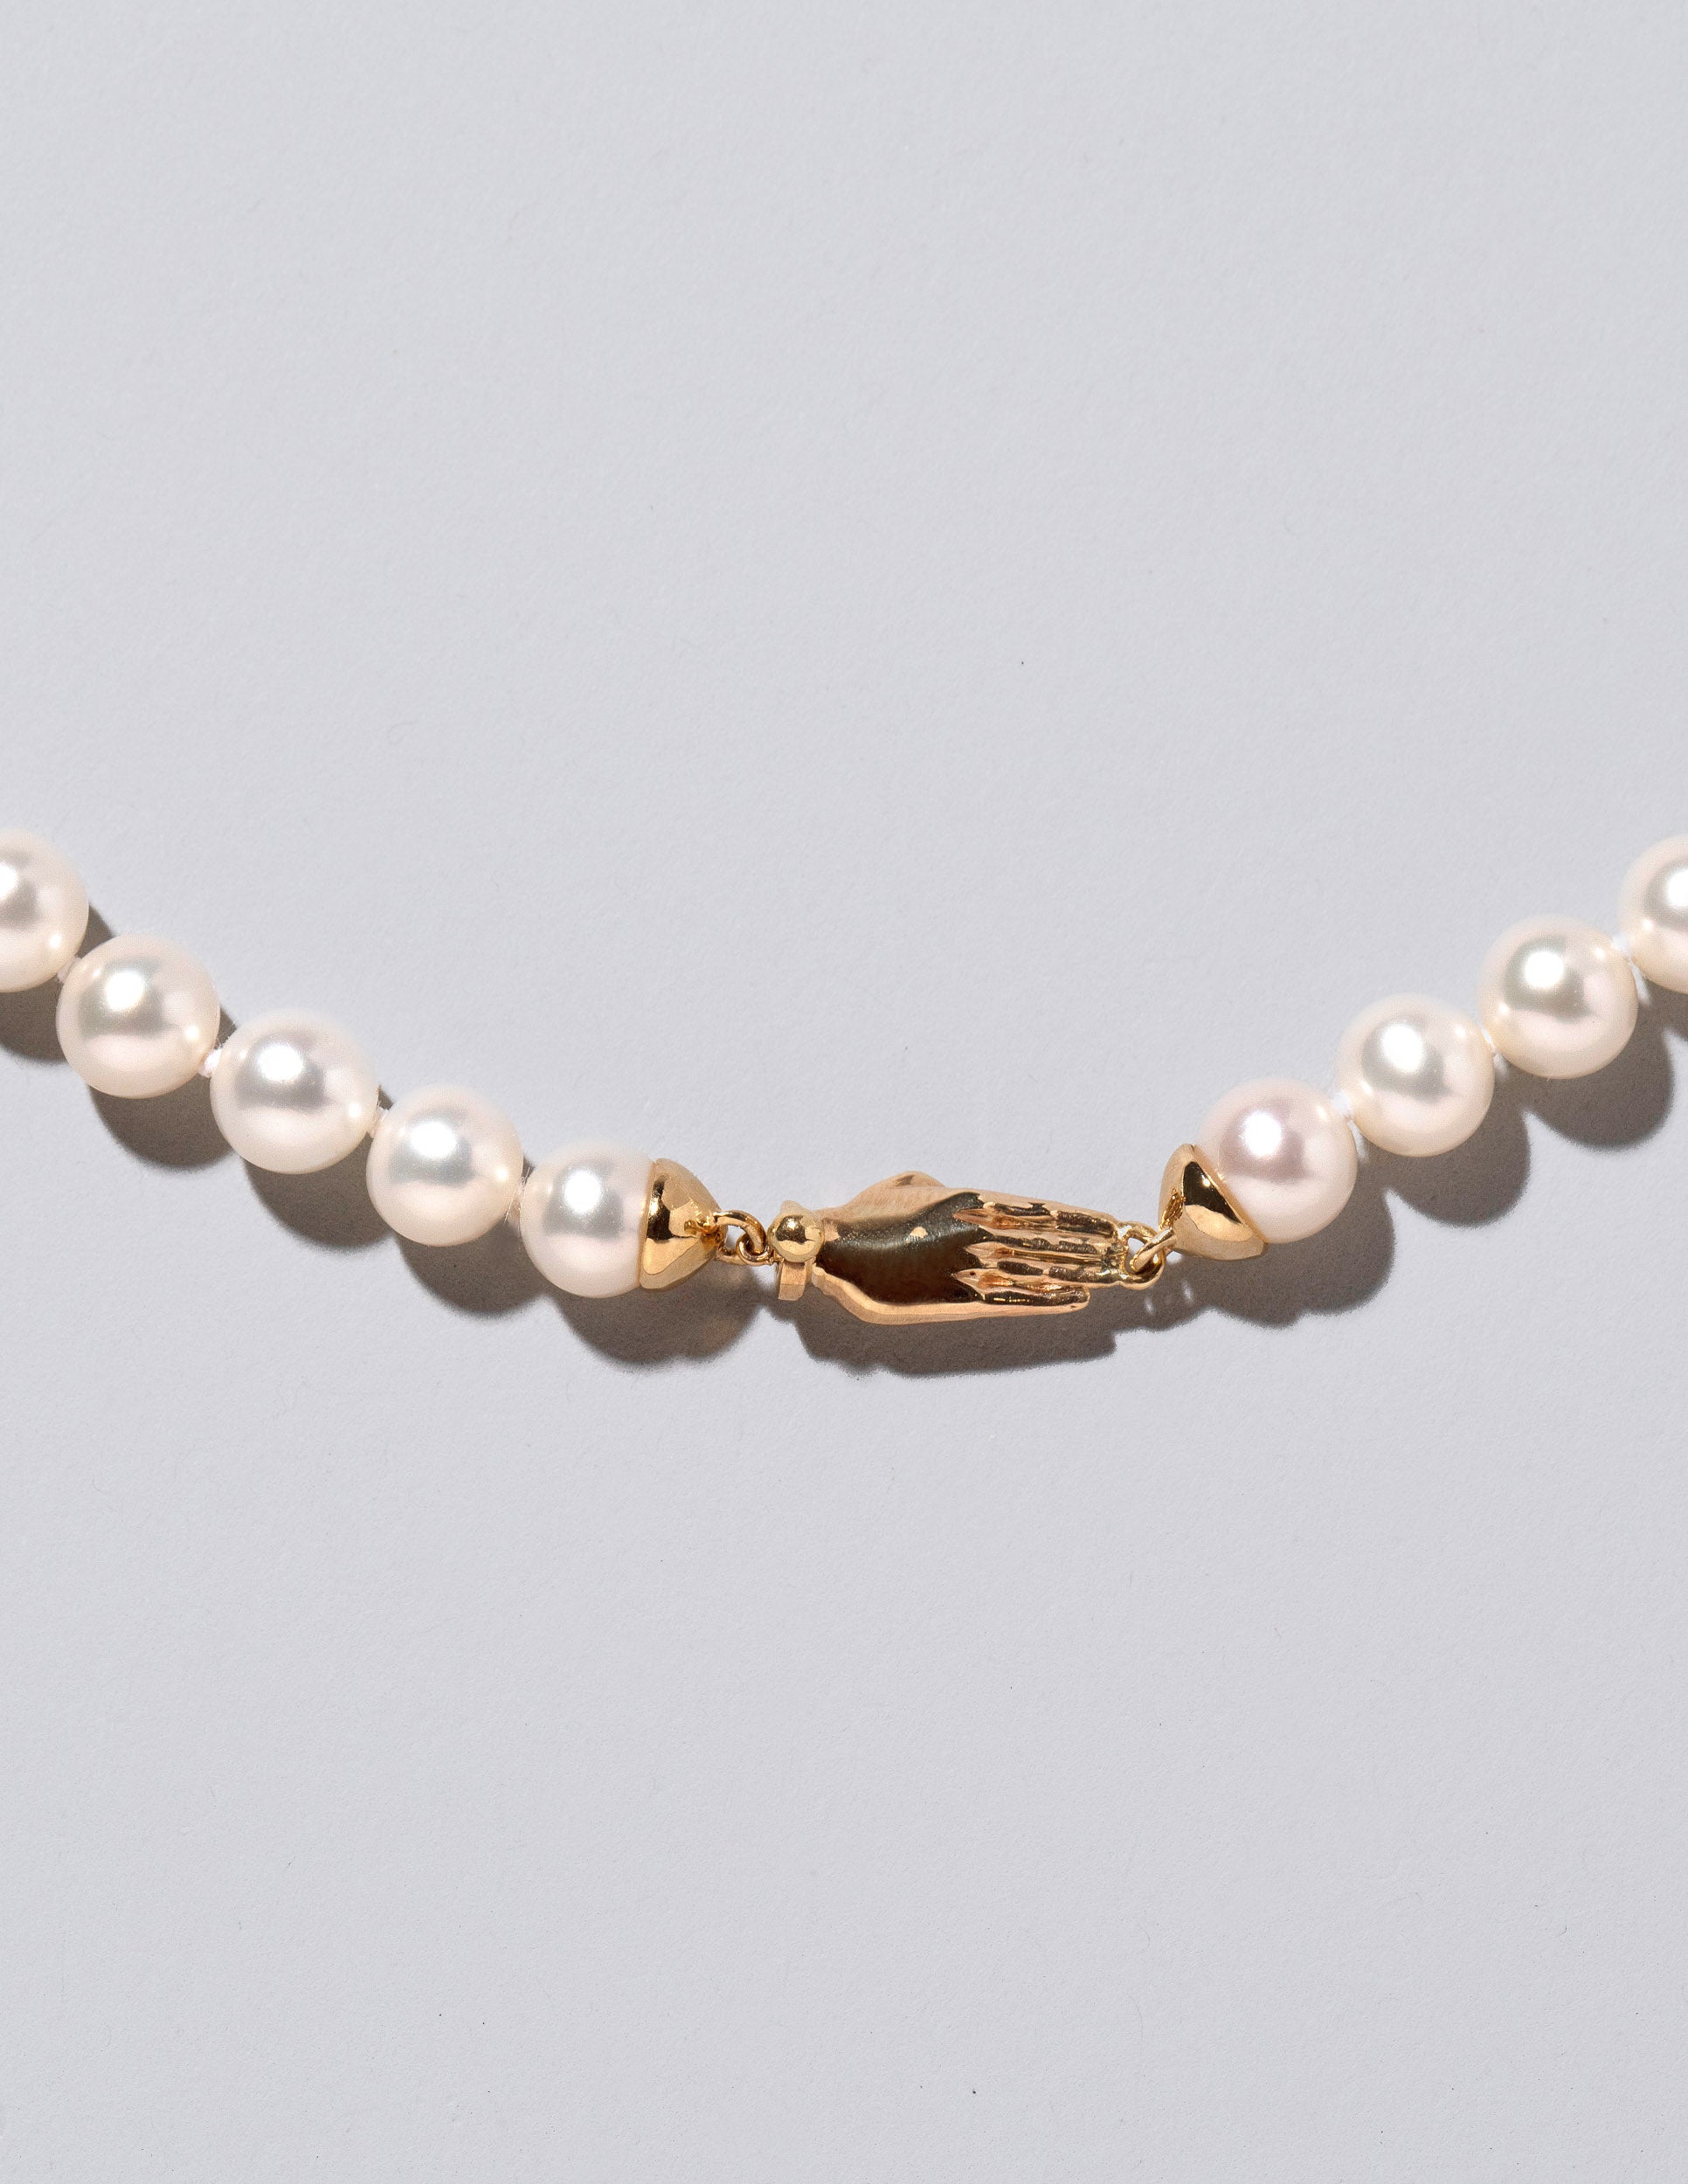 Closeup detail of the White Pearl & Yellow Gold Union Pearl Necklace on light color background.